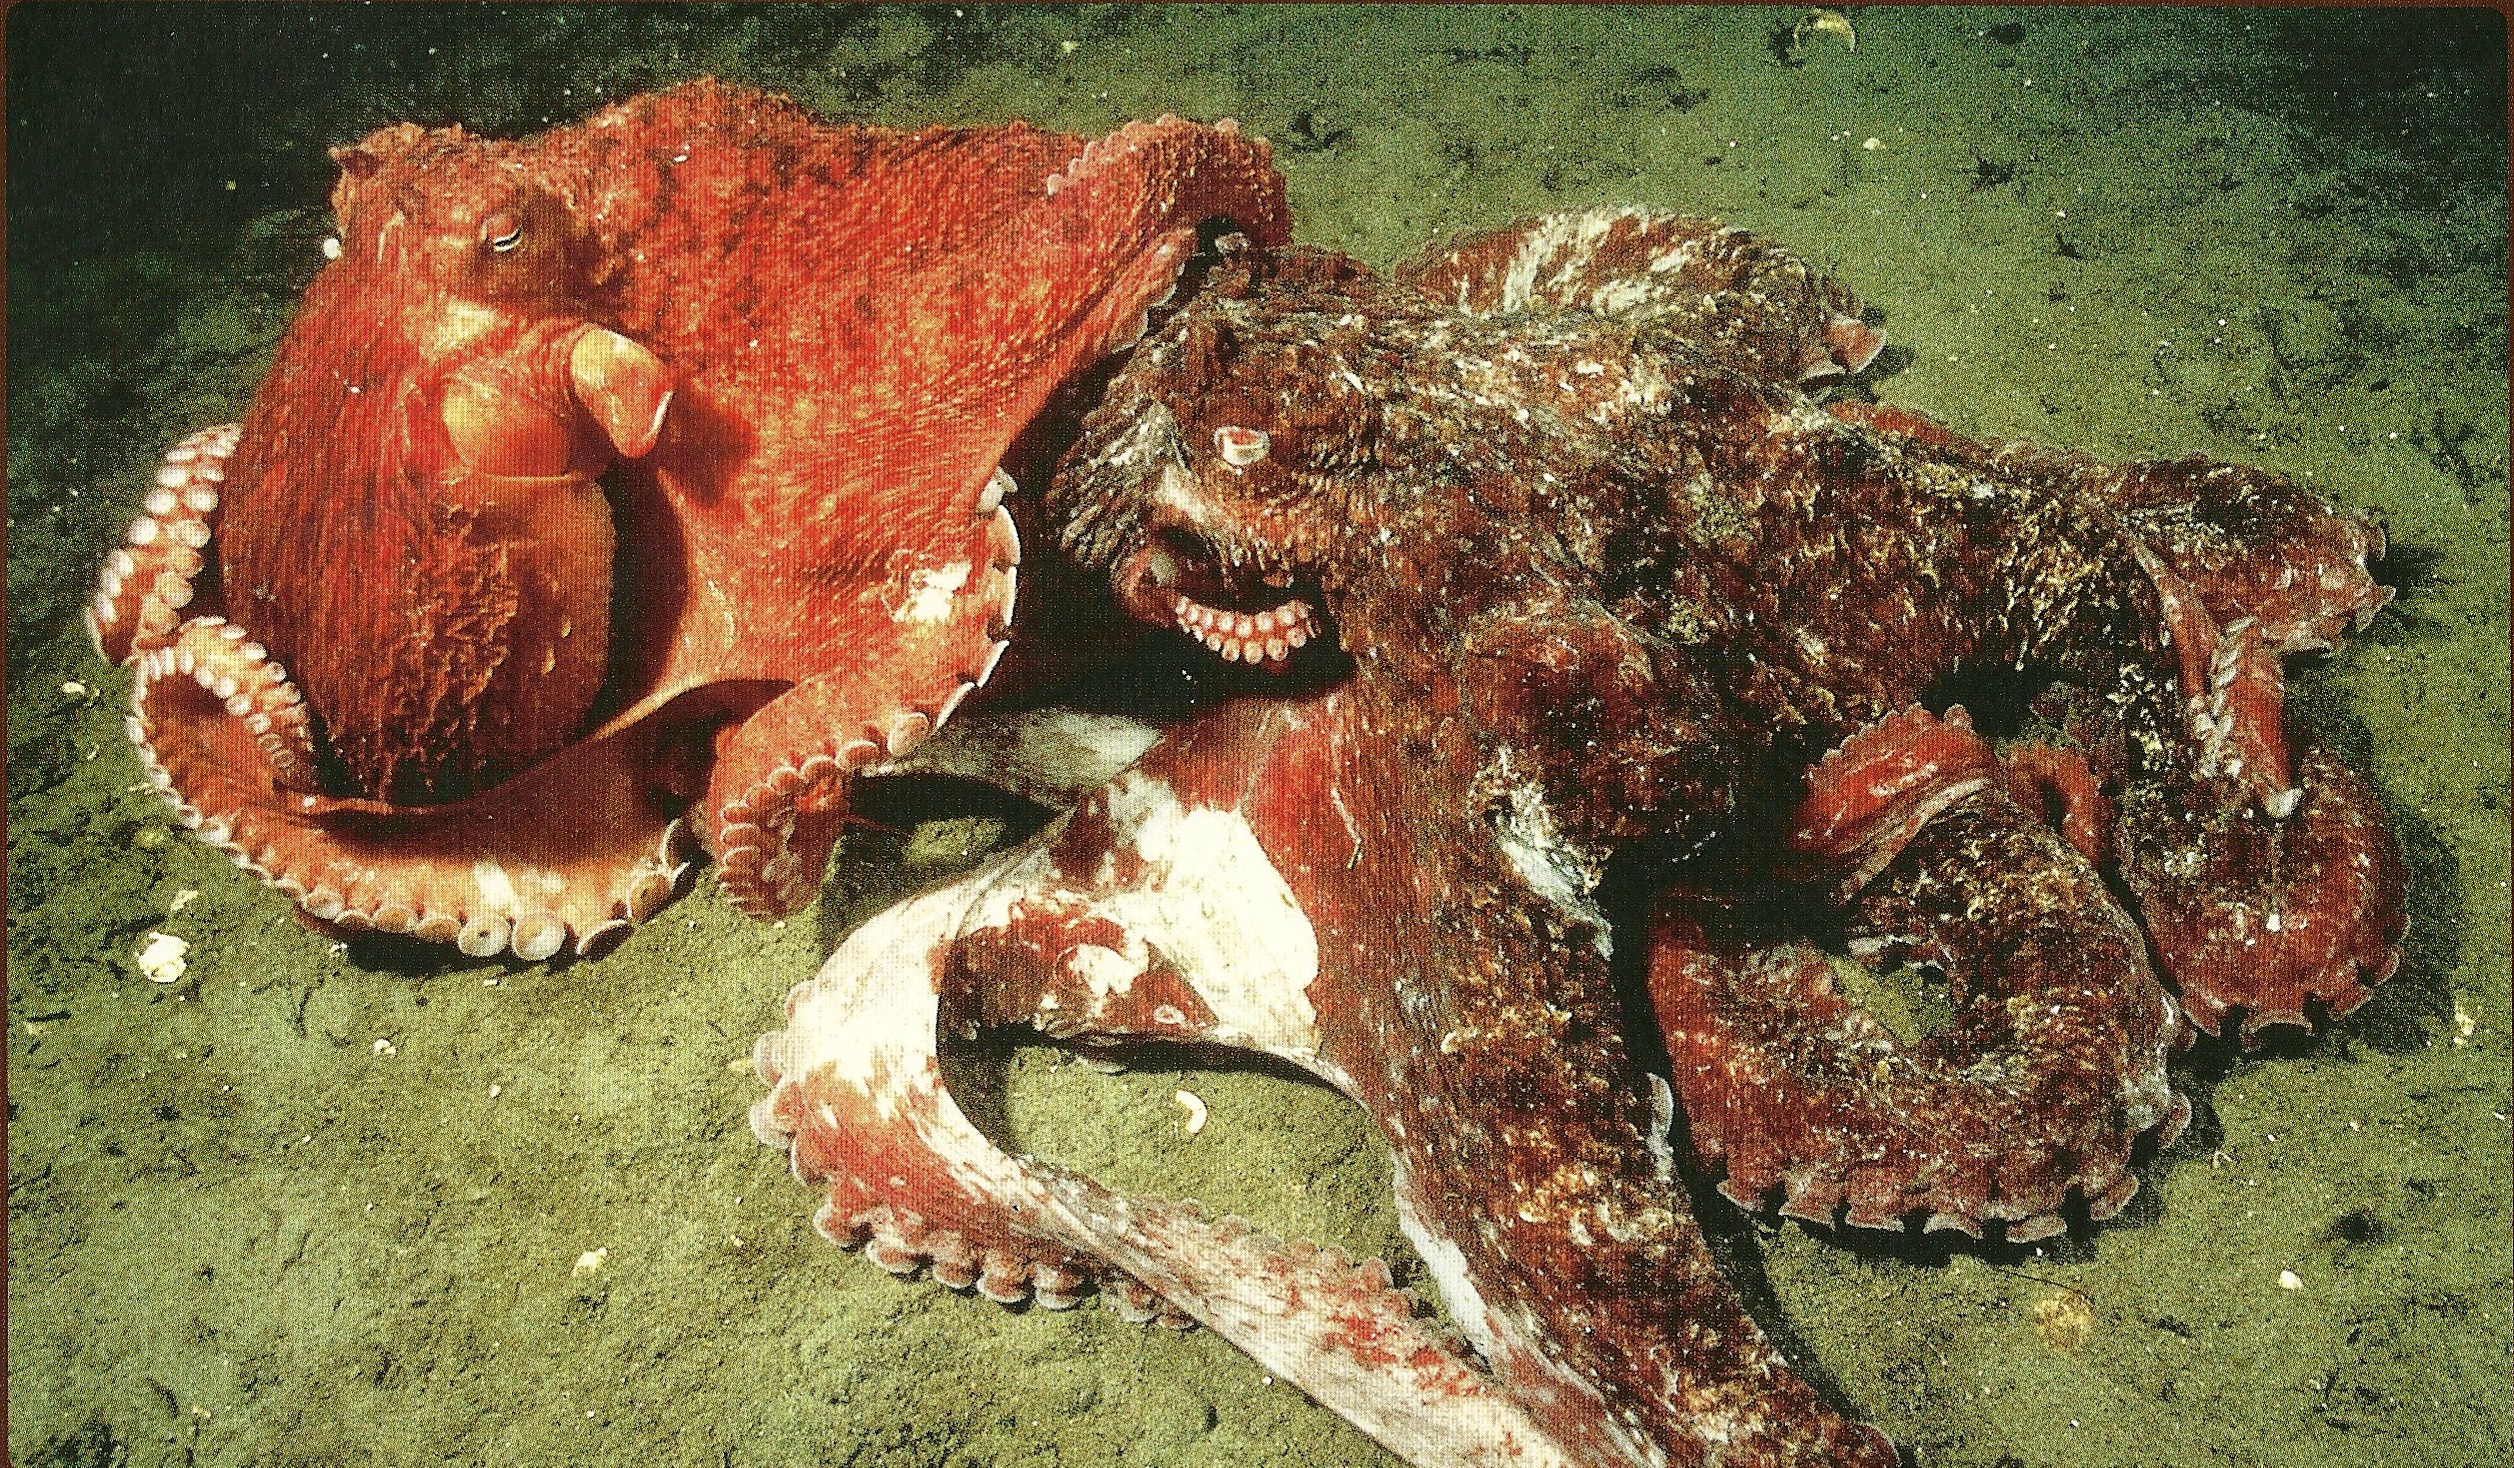 giant pacific octopus